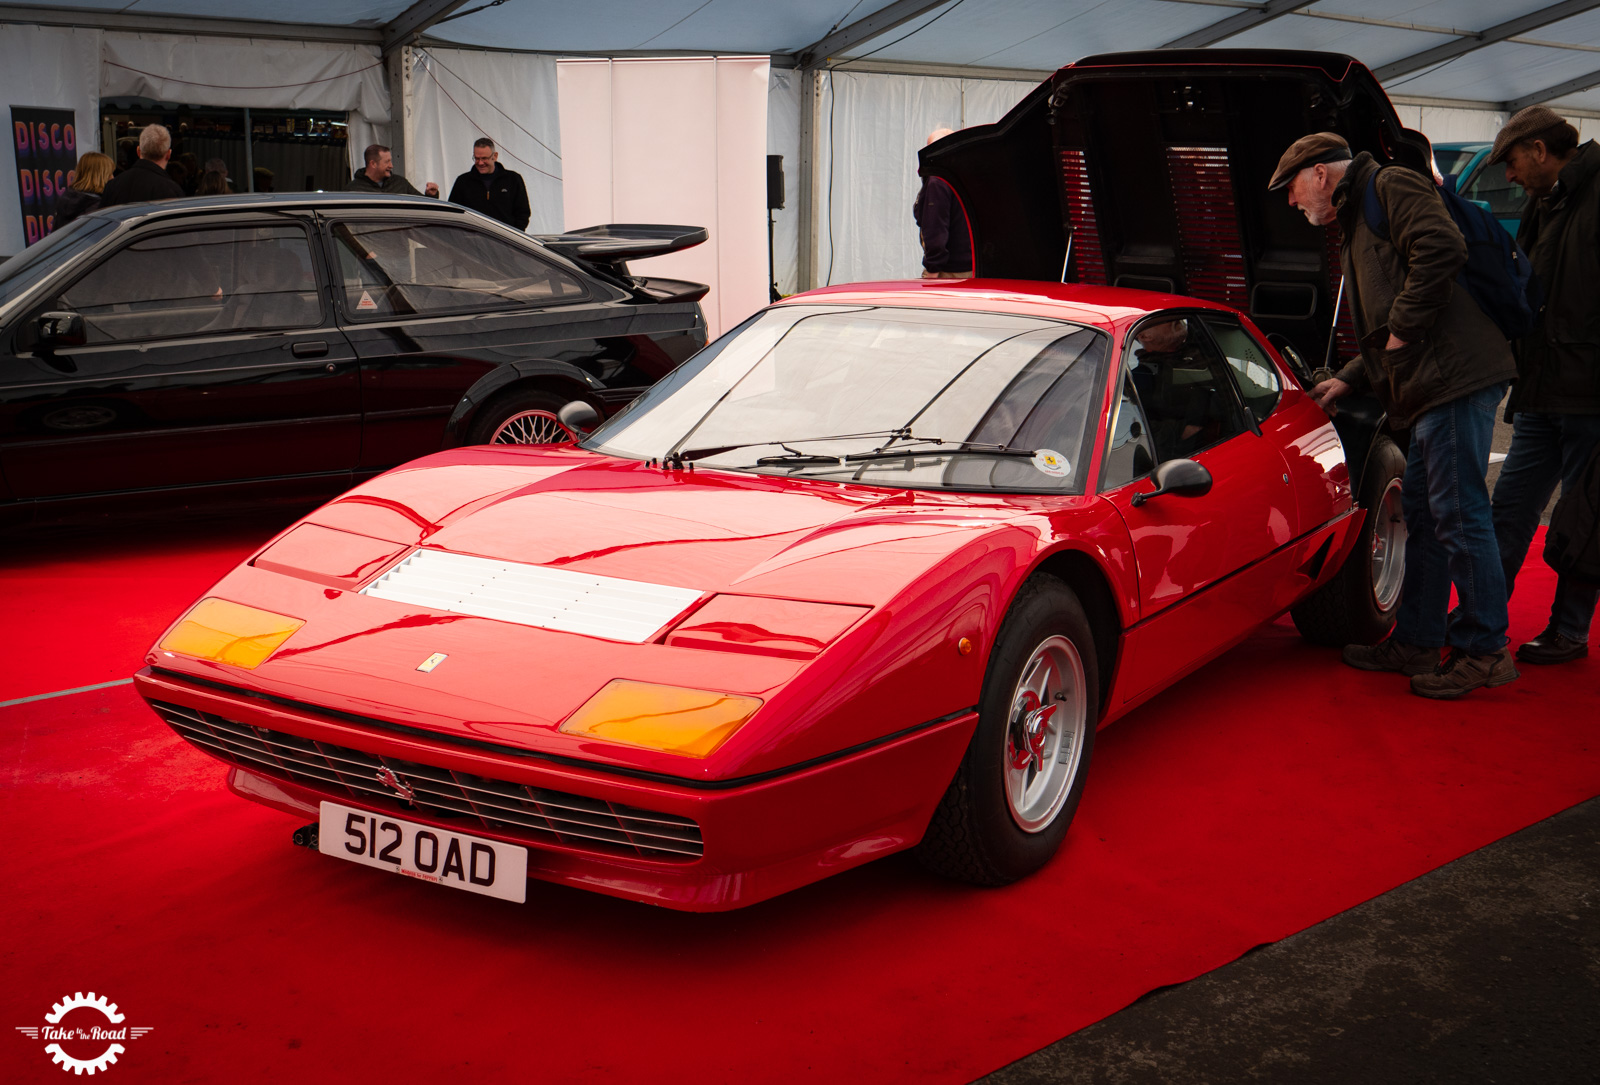 Great Western Classic Car Show 2020 Highlights